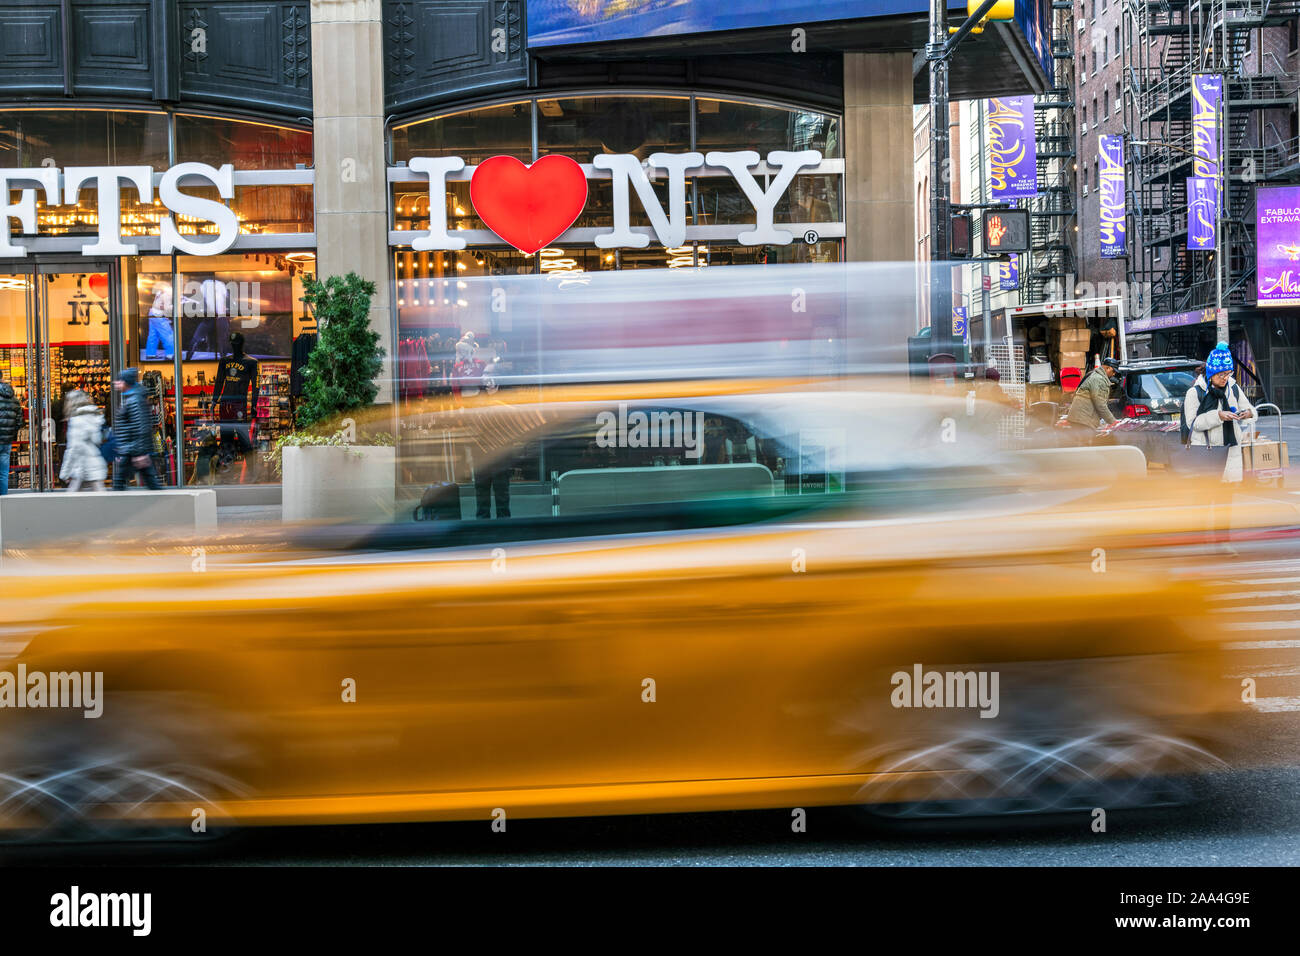 I Love New York gift shop sign and blurred yellow taxi cab passing, Times Square, Manhattan, New York, USA Stock Photo